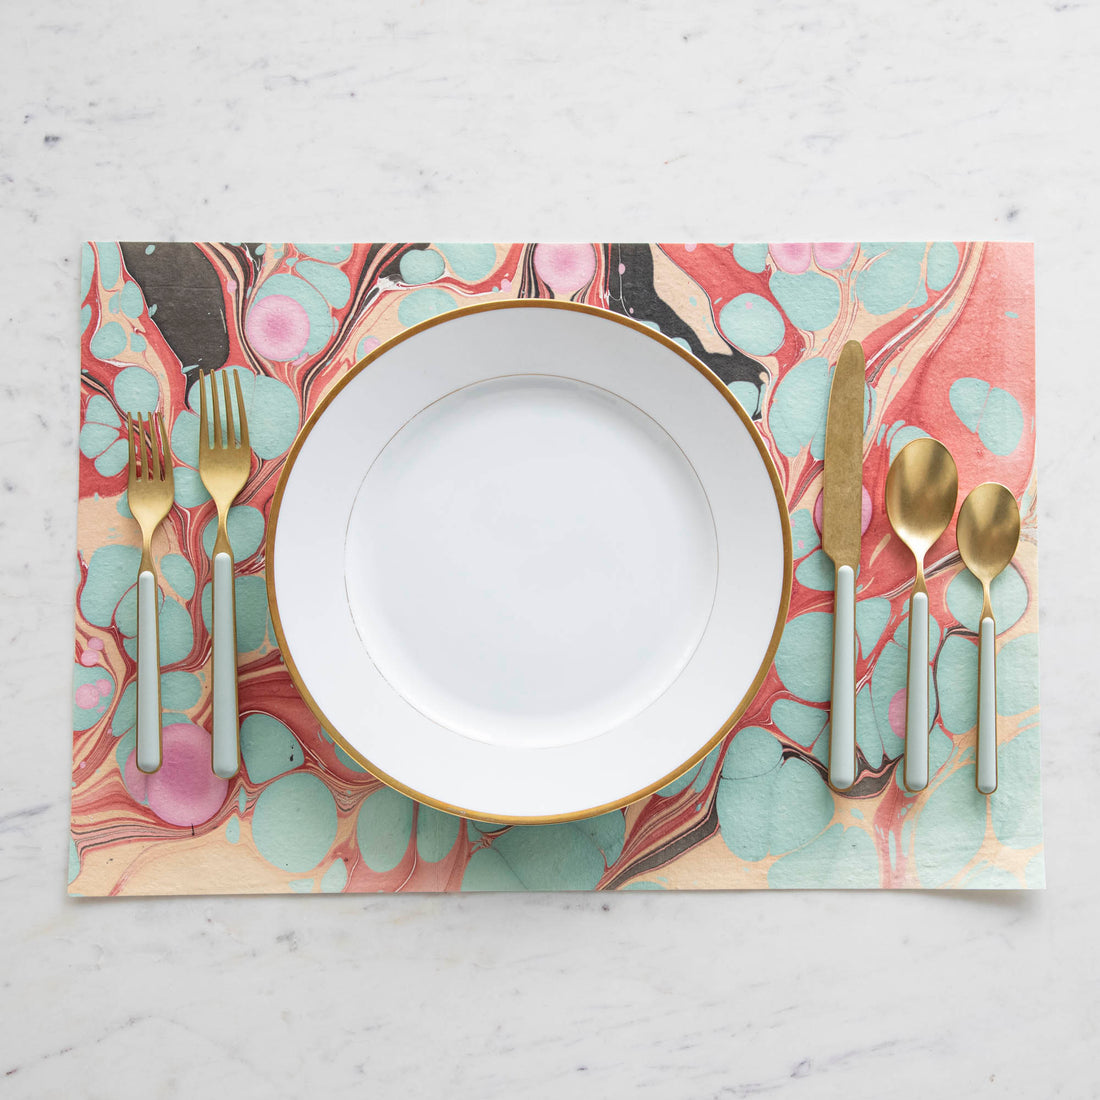 Fantasia Sage 5-Piece Place Setting by Mepra arranged on a marble surface.